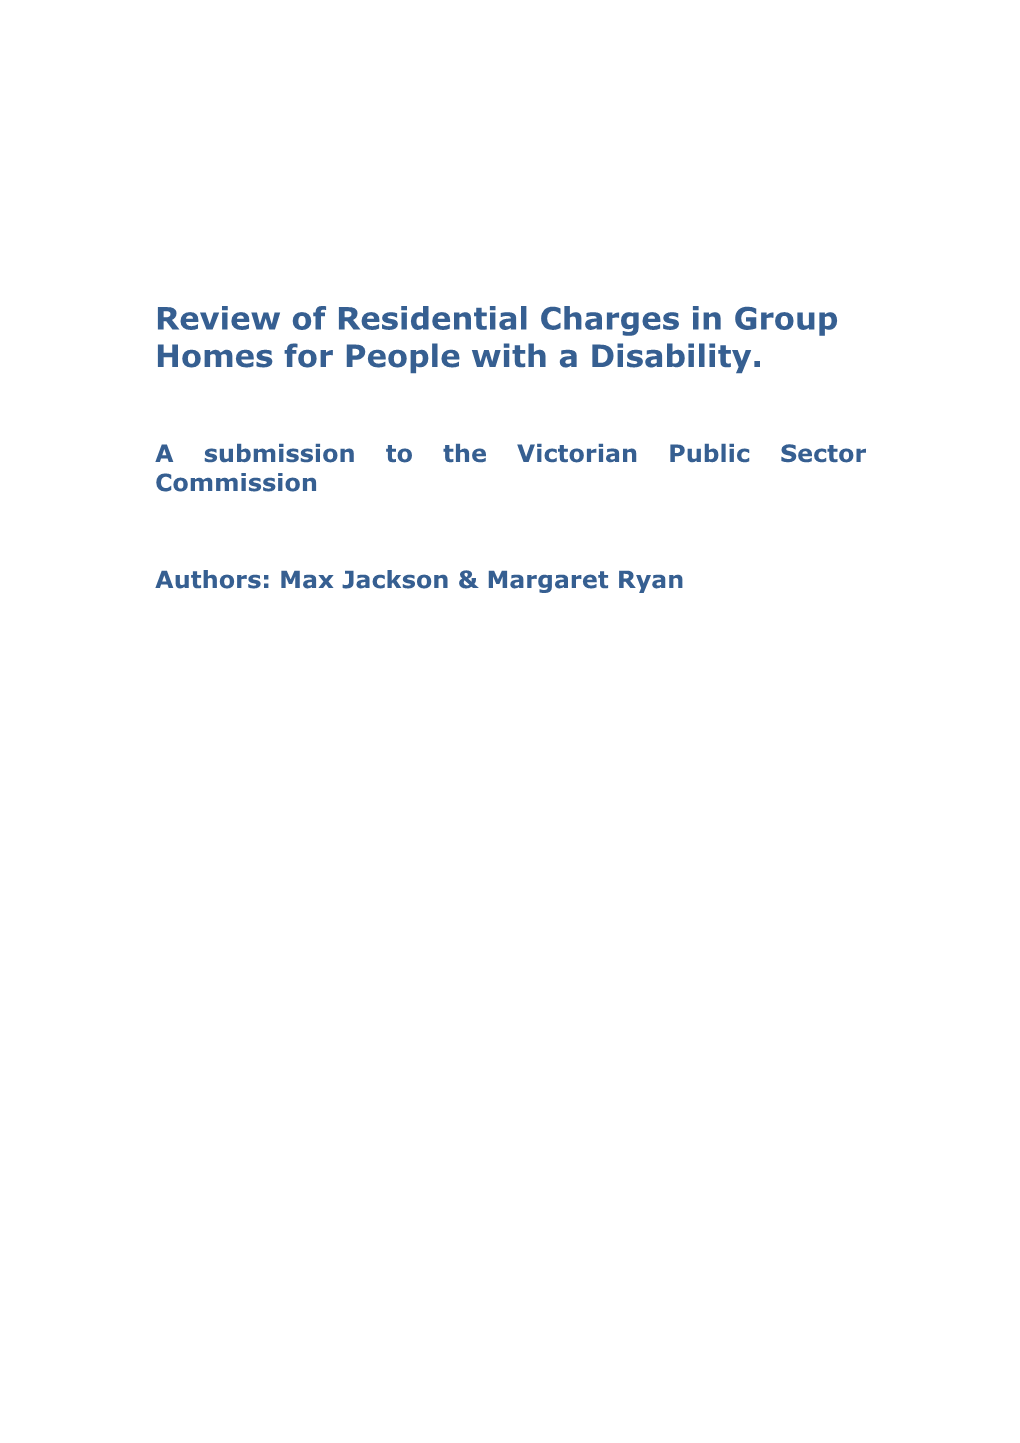 Review of Residential Charges in Group Homes for People with a Disability